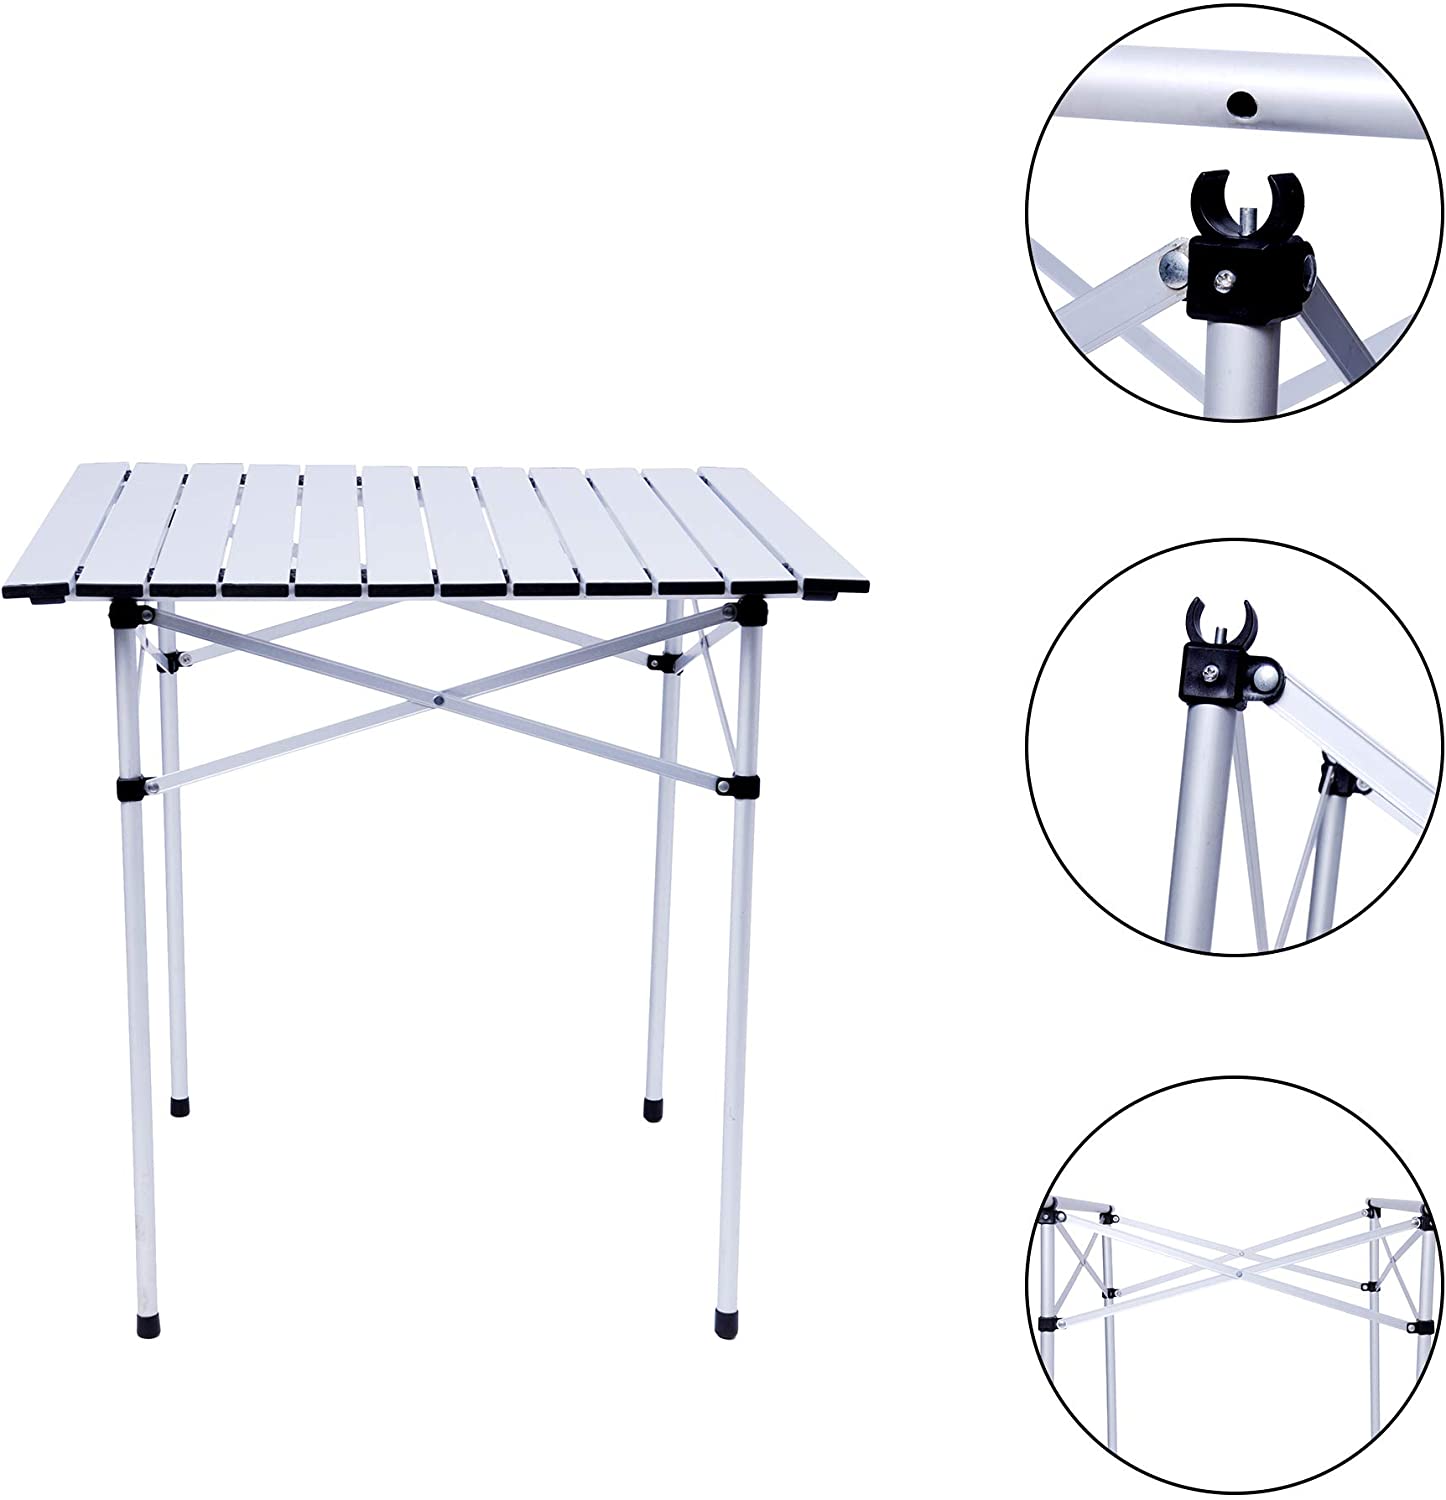 Aluminum Camping Table Lightweight Portable Outdoor Picnic Table with Roll Up Top Carrying Bag for Picnic Beach BBQ Party Traveling Hiking